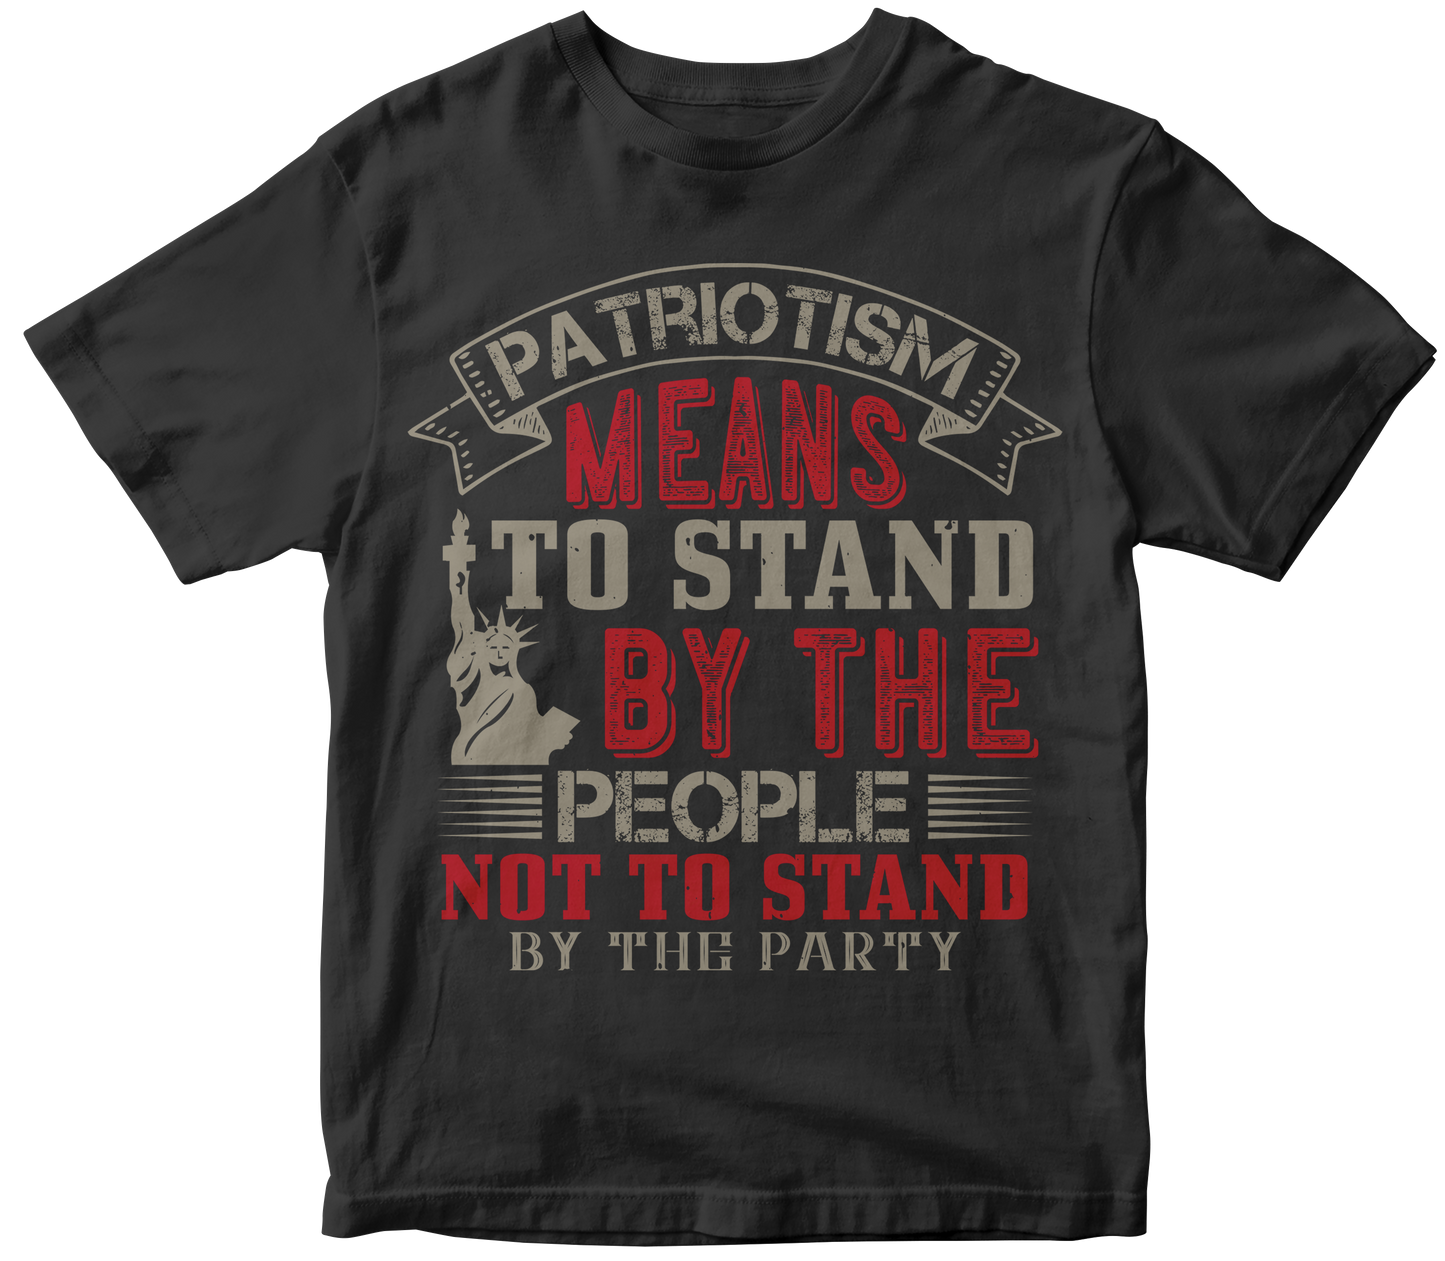 Patriotism means to stand by the people, not to stand by the party